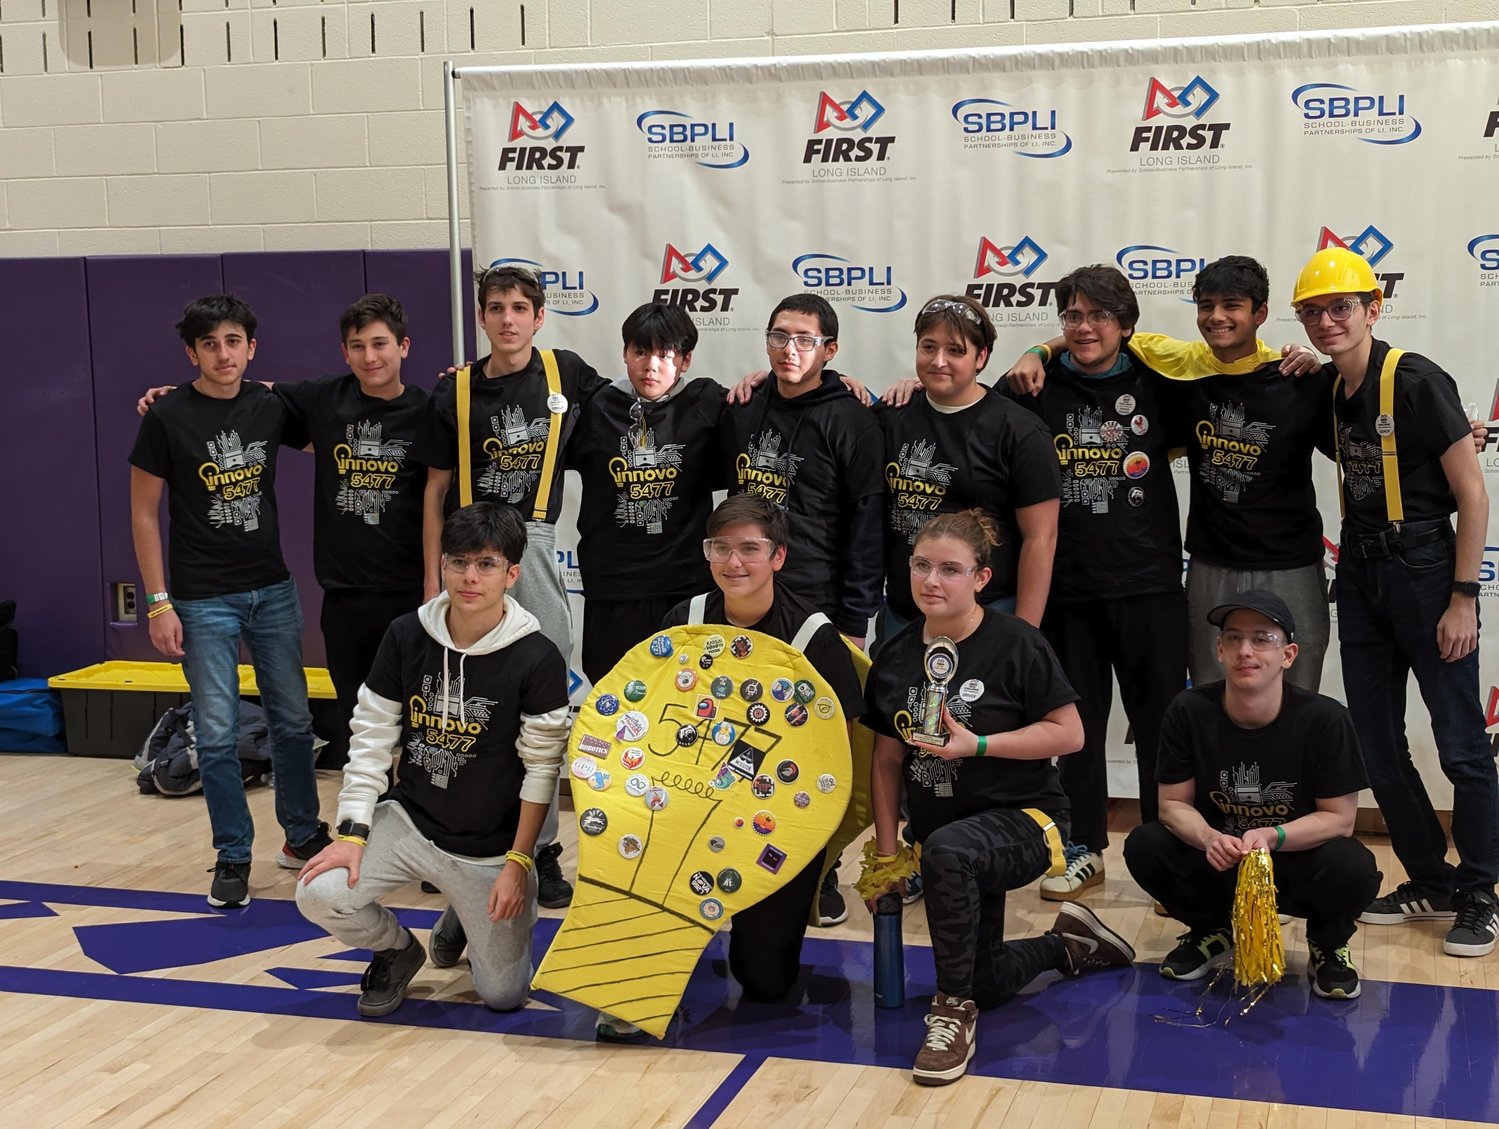 Hewlett High School’s robotics team shines at the competitions, capturing several awards.